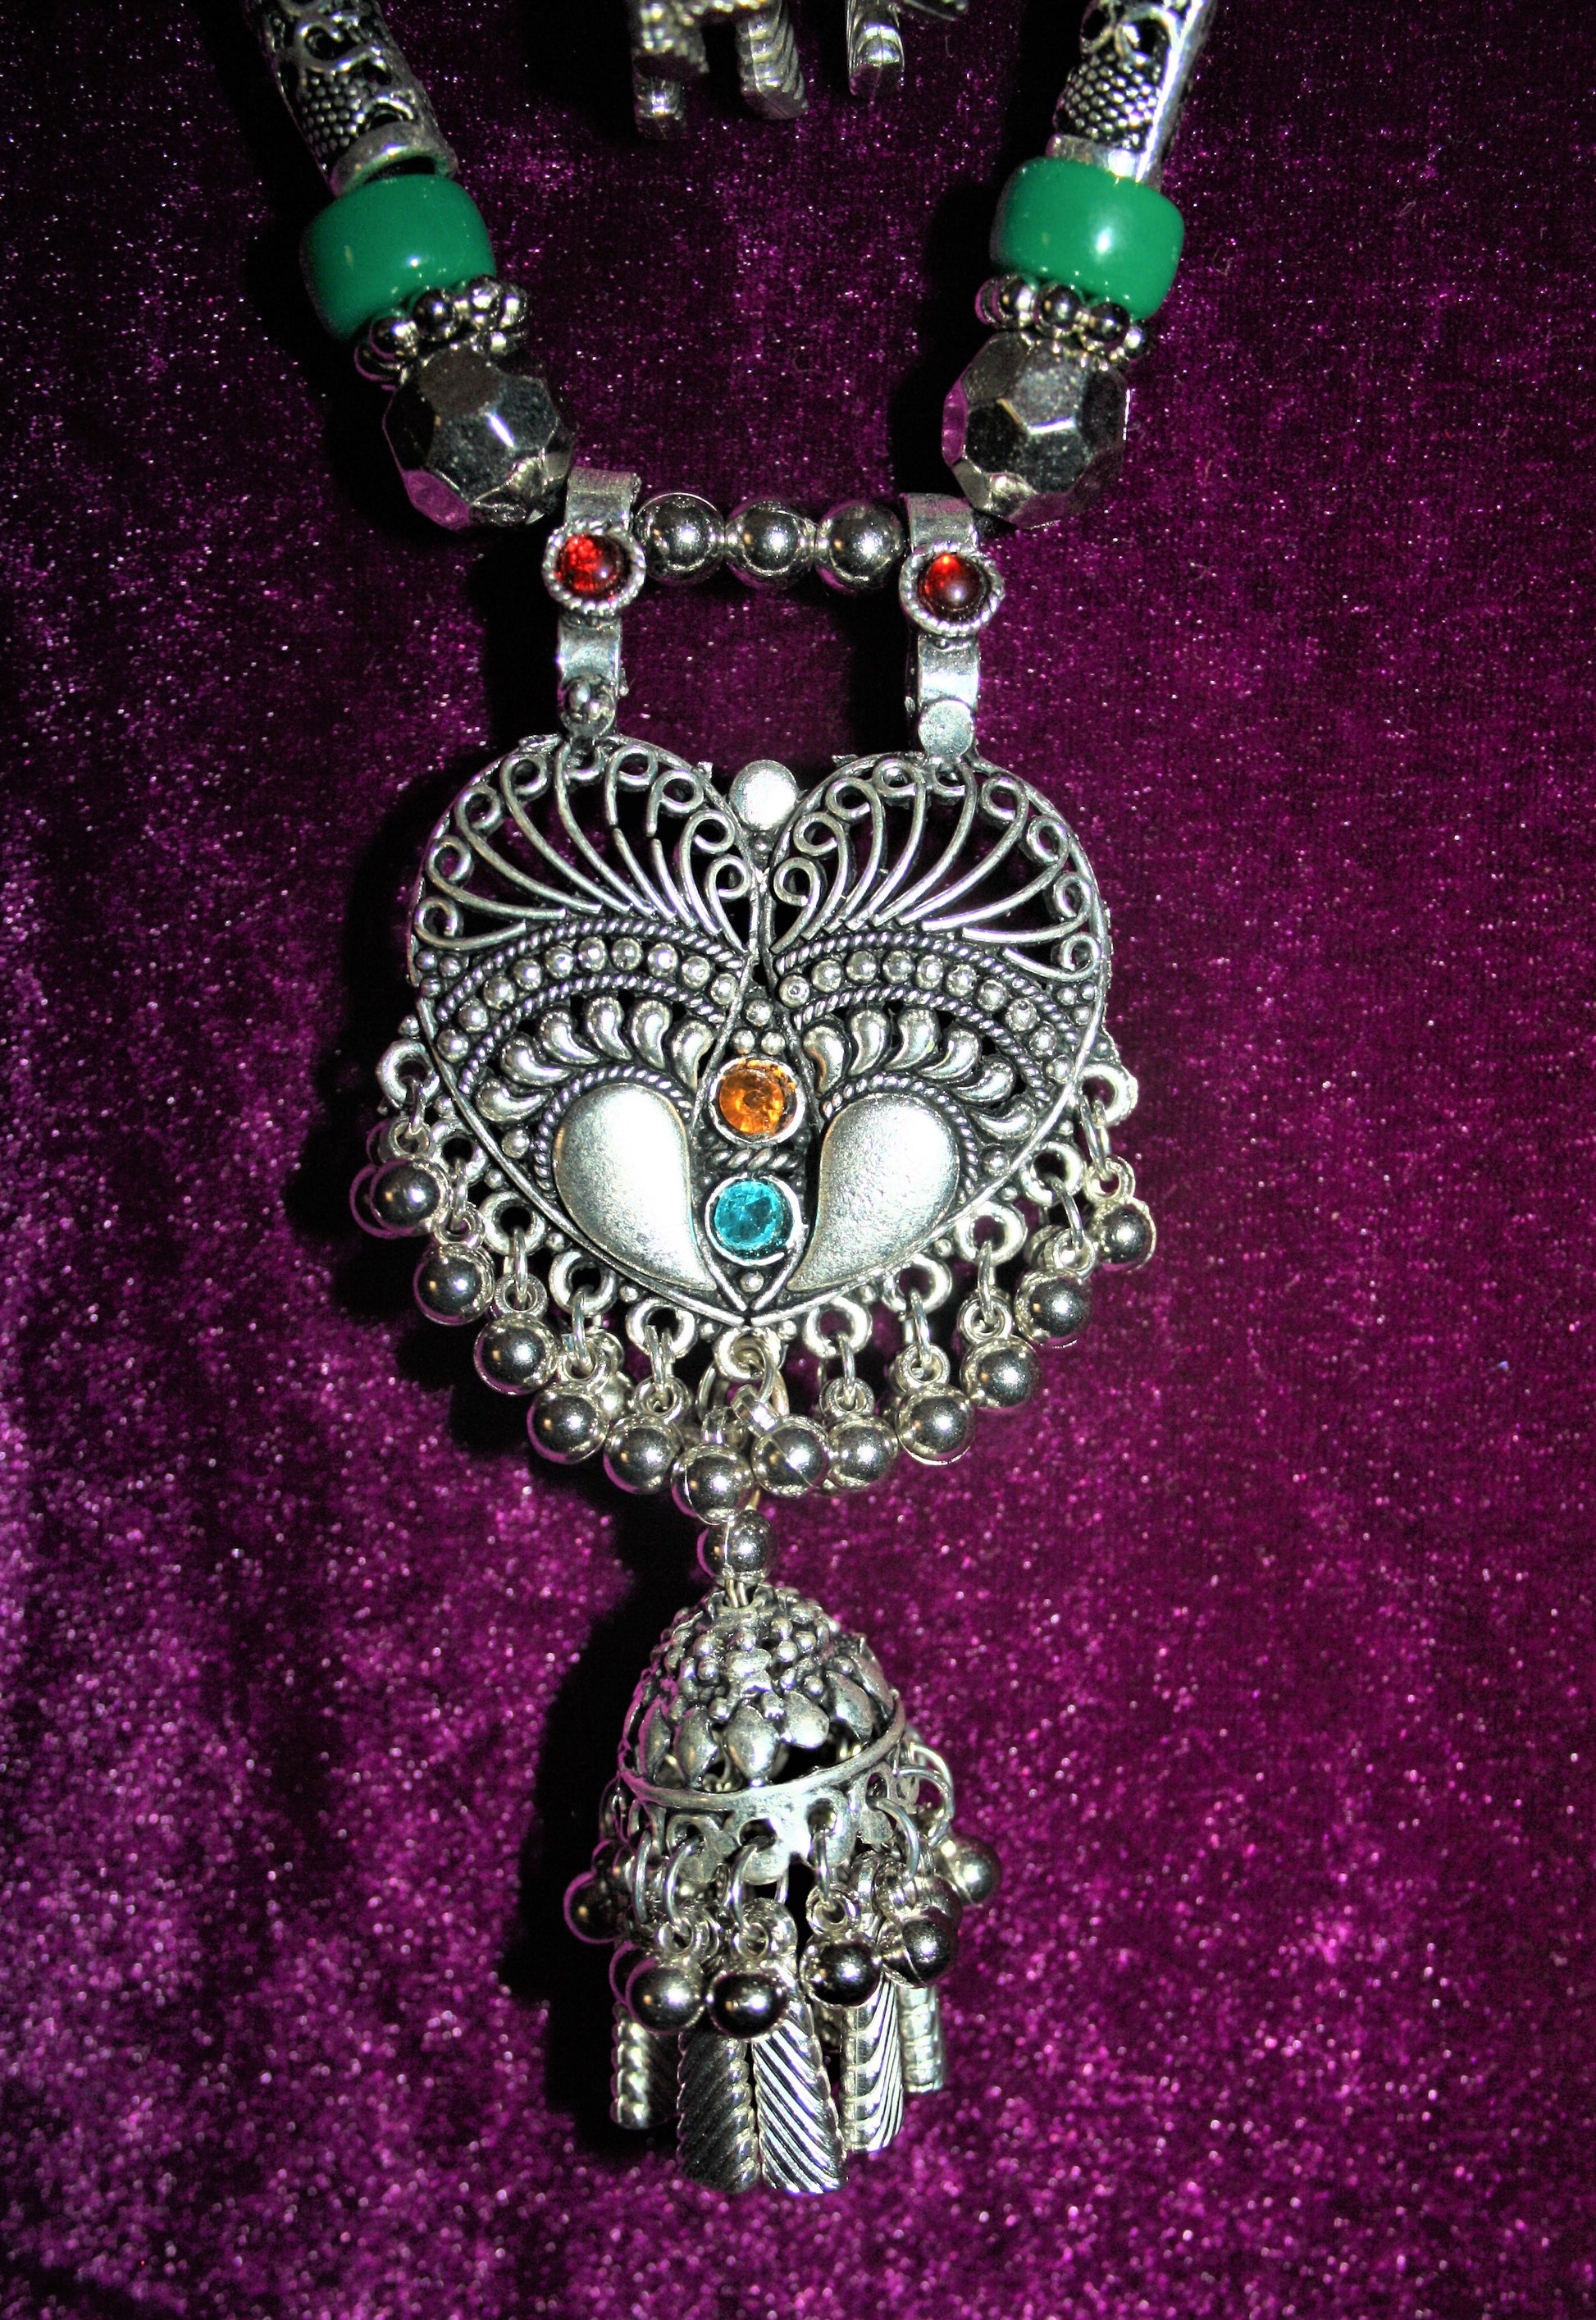 Silver Oxidised Double Layer Jhumki Pendant Necklace with Earrings - GlitterGleam